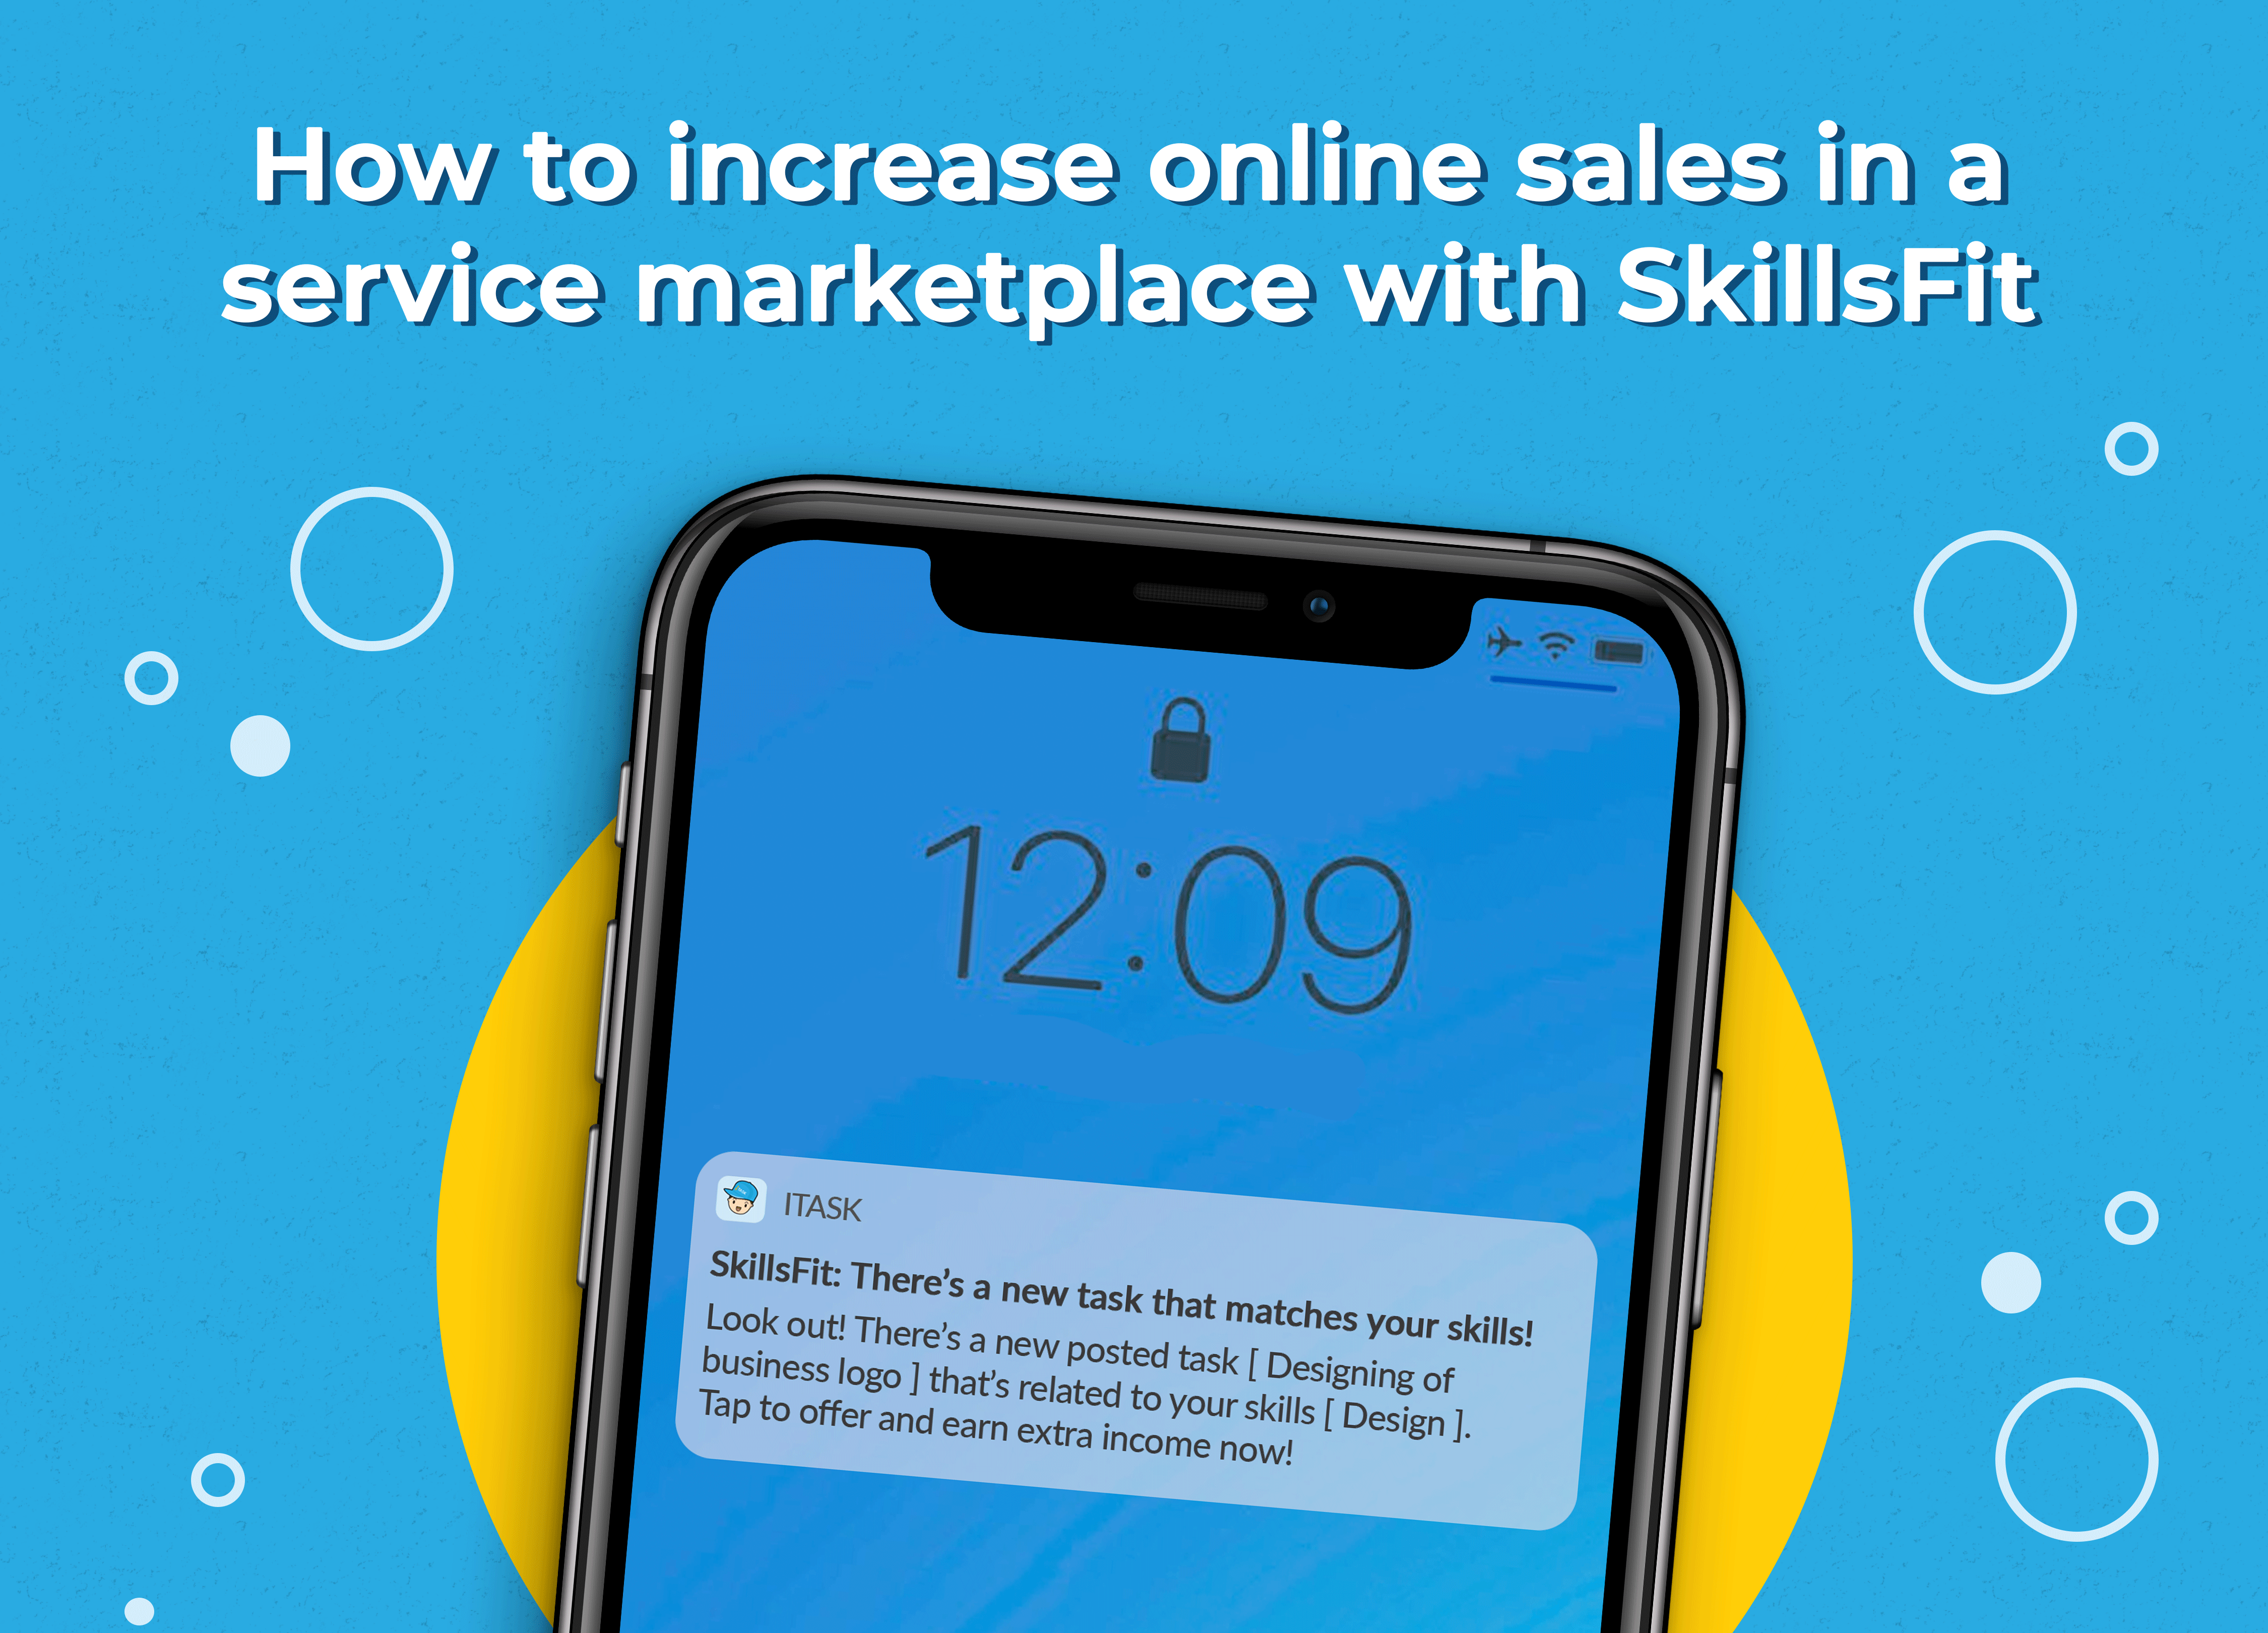 How to increase online sales in a service marketplace with SkillsFit